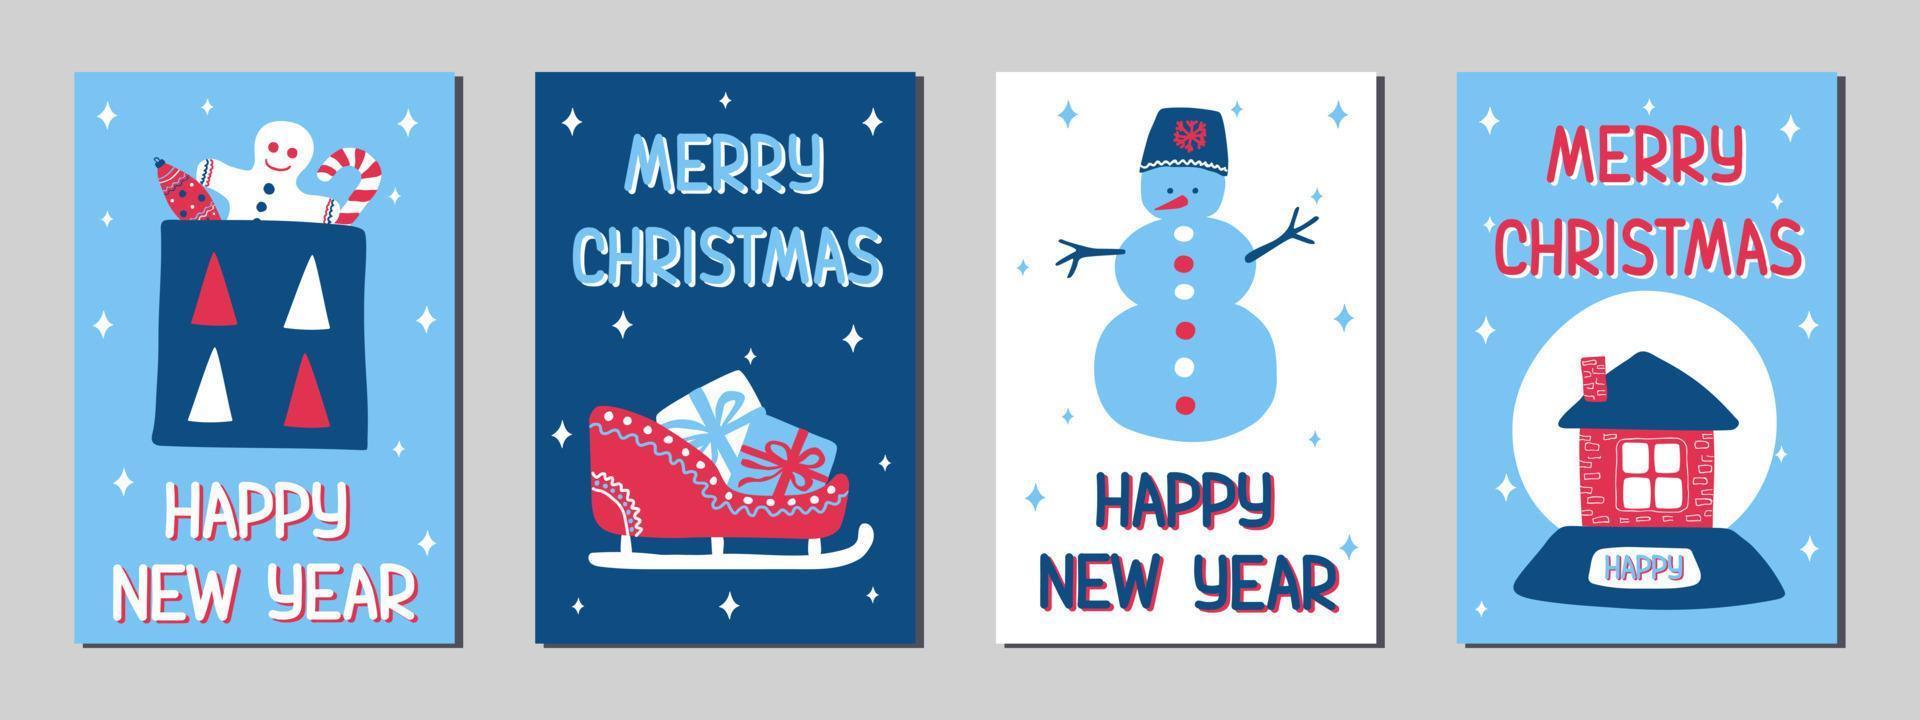 Christmas and New Year greeting cards in the Scandinavian doodle style, classic blue, pink and white colors. Stock vector illustrations with symbols of holiday - gift, sledge, gingerbread man, snowman